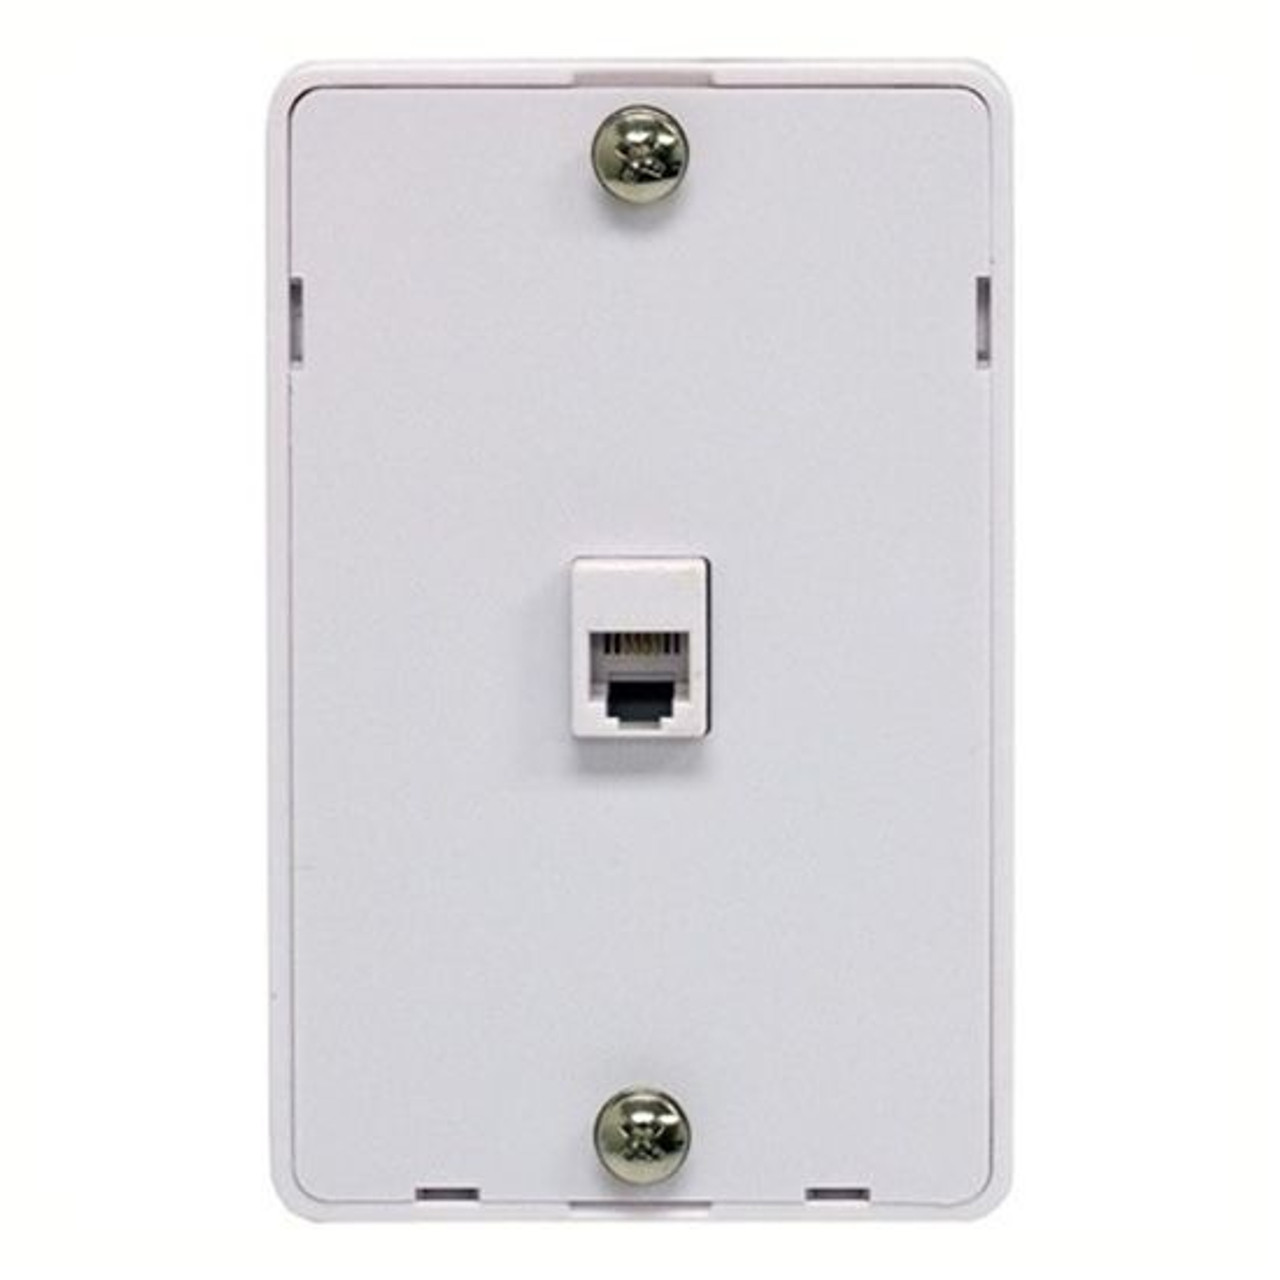 Leviton 832-C0253W RJ11 Single Gang Wall Phone Jack White Surface Mount 4 Wire Flush Telephone Line Plug Cover Wall Connect Hanger